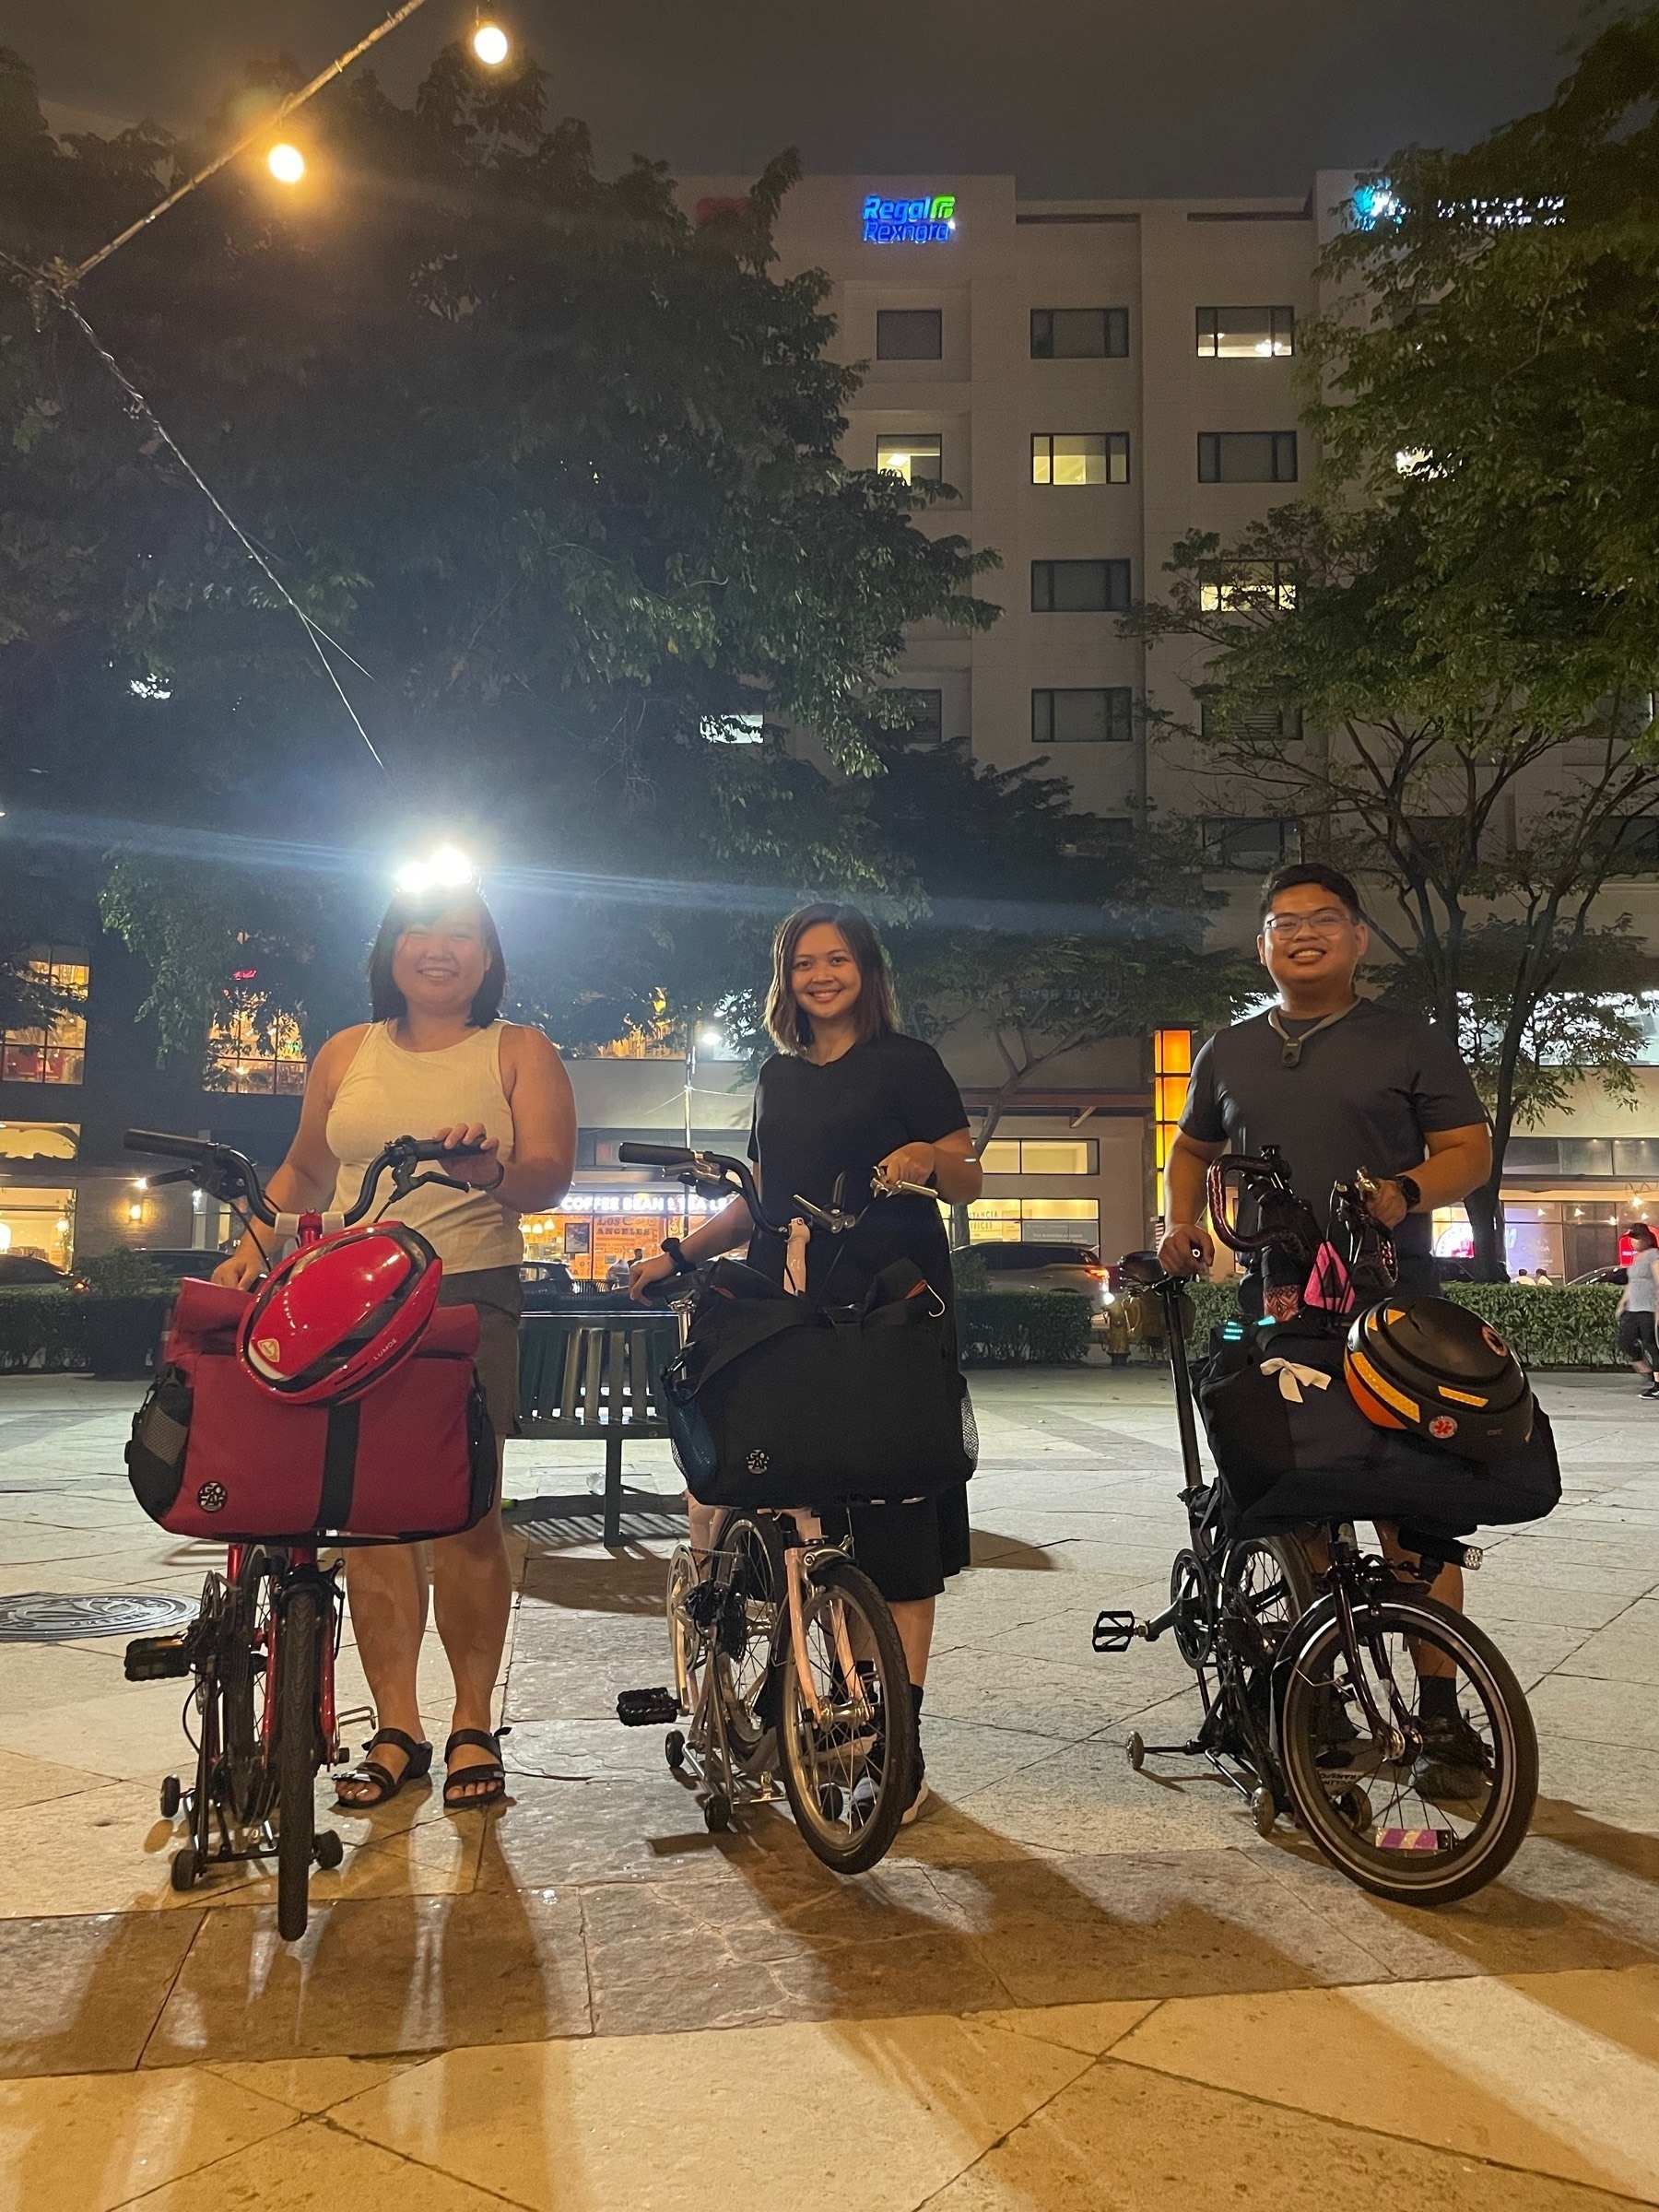 Chi posing with her two friends, Karen and Nix, next to their own trifold bikes and setups. On top of Chi's head, a street light is pointed towards the camera, so the top part of her head is obscured by the light.